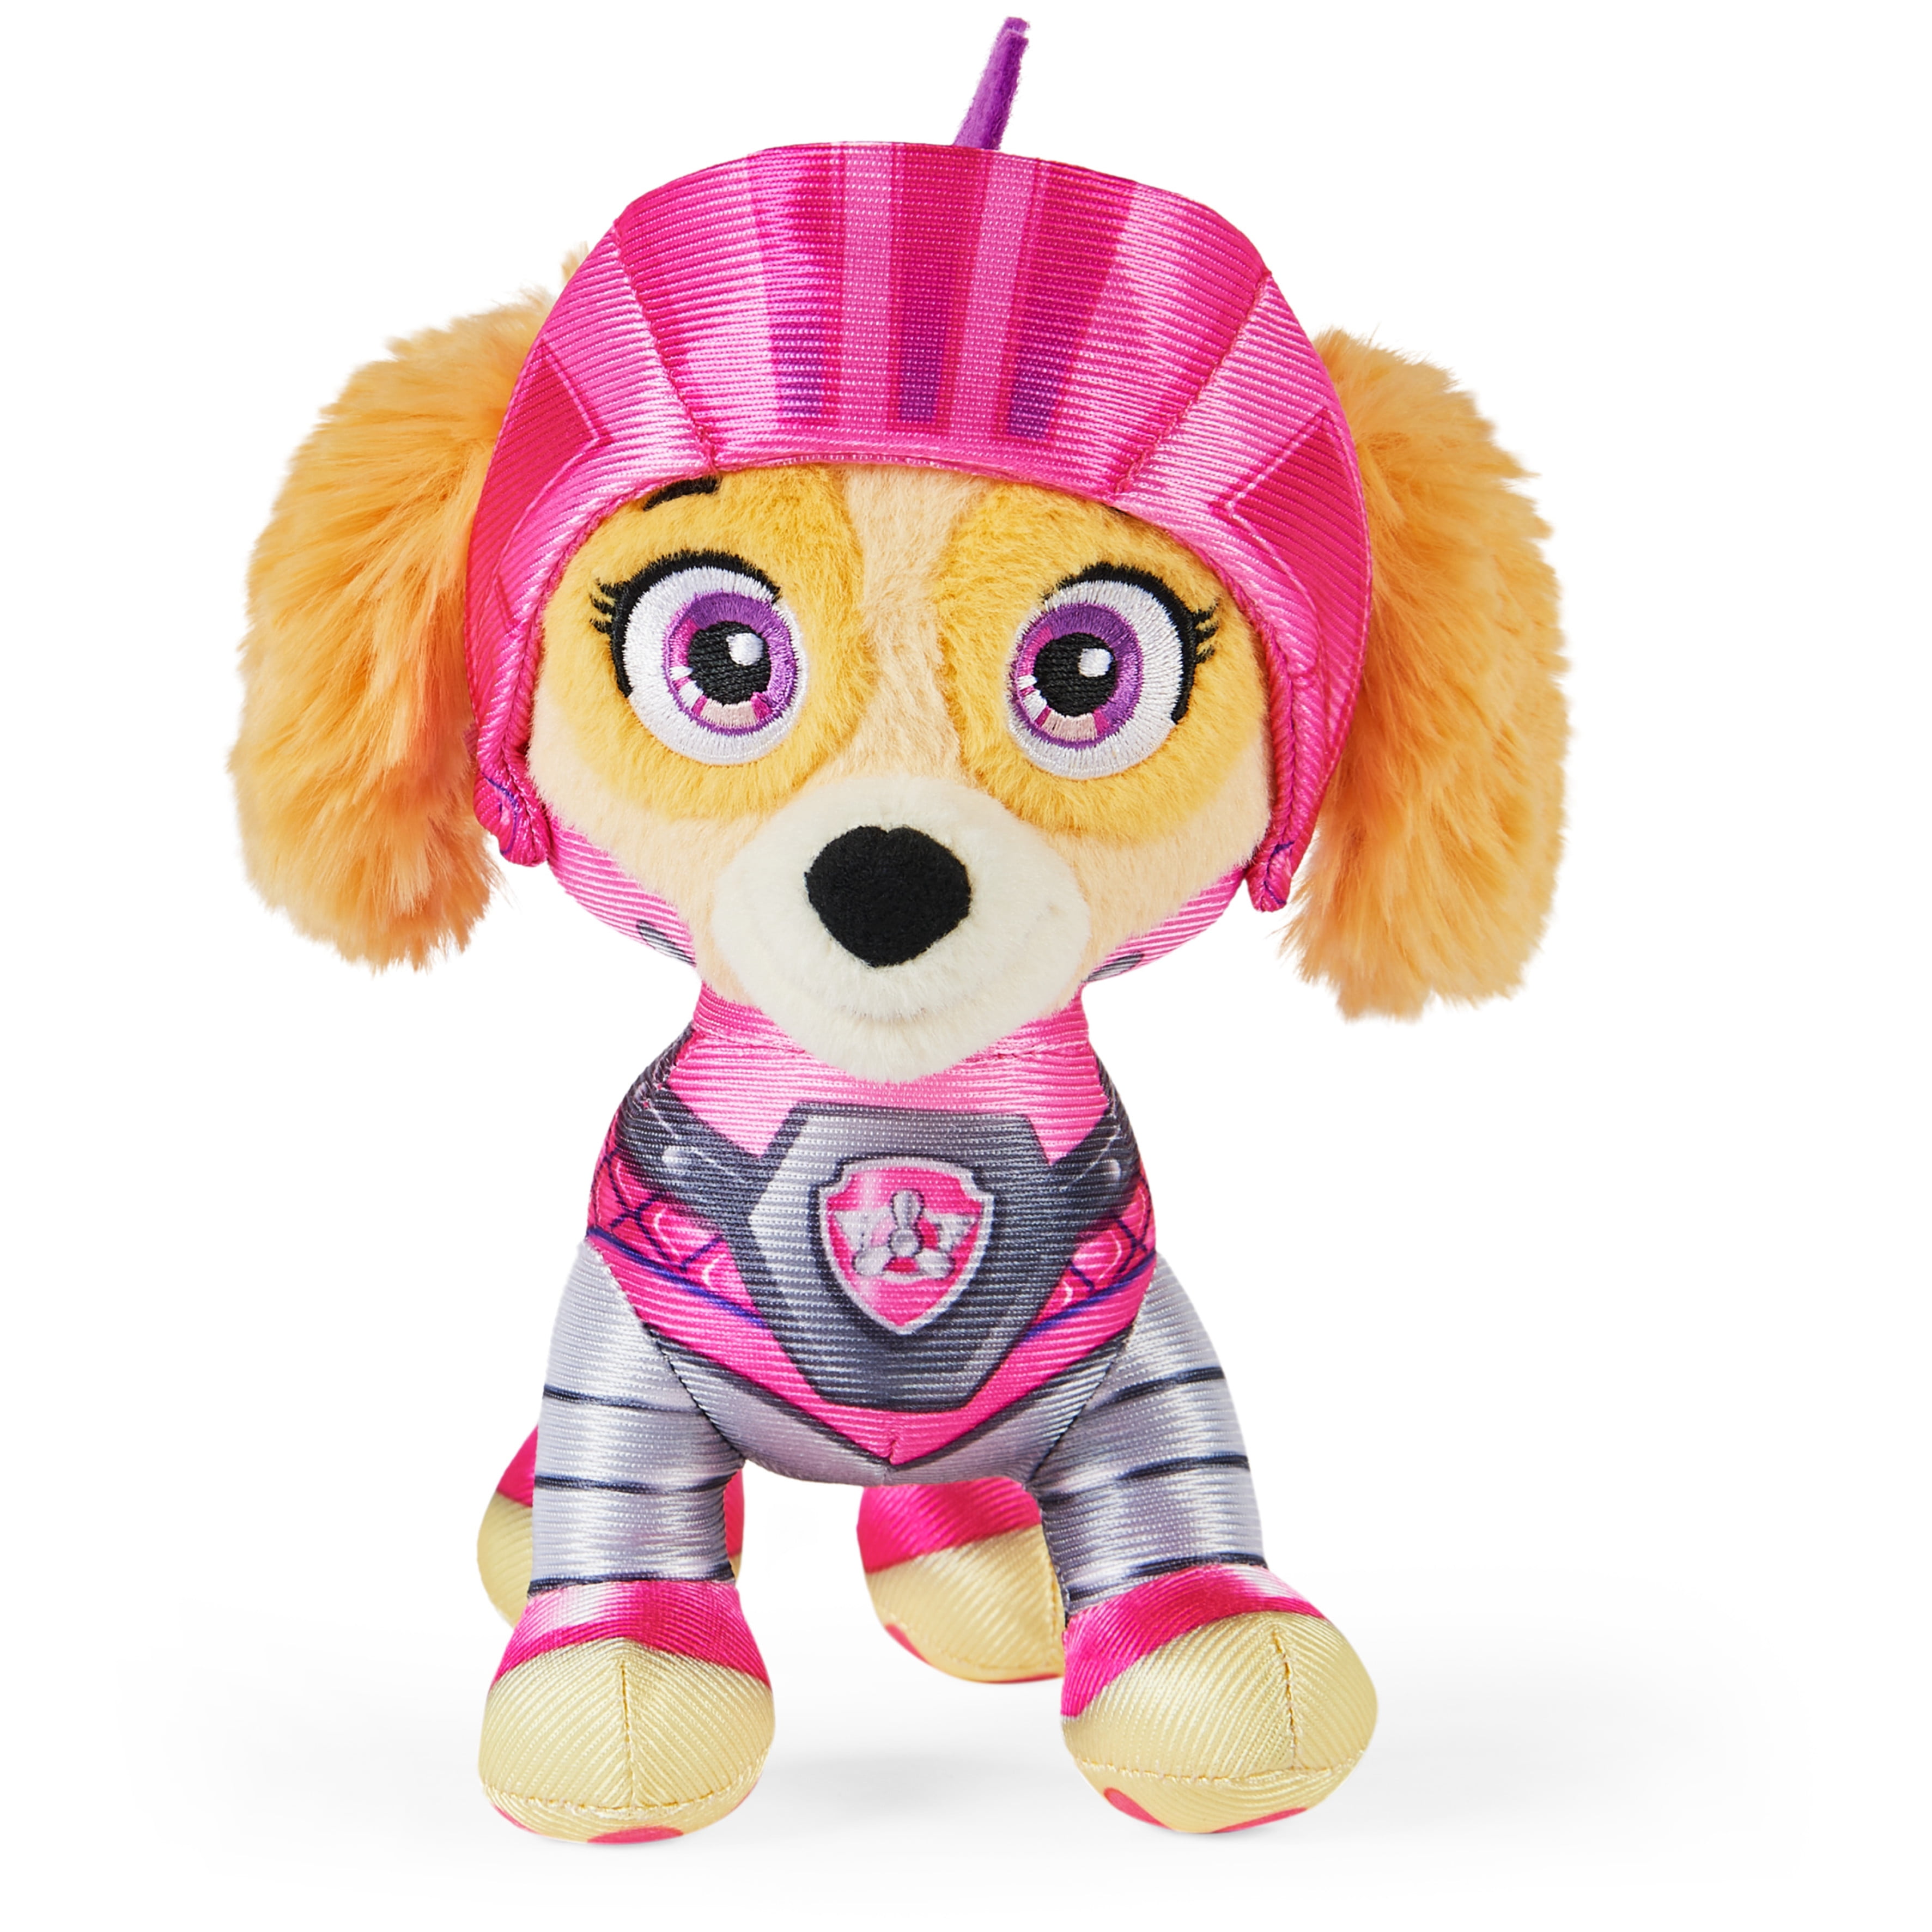 PAW Patrol: Rescue Knights - Skye Plush Toy, 8-Inches Tall 